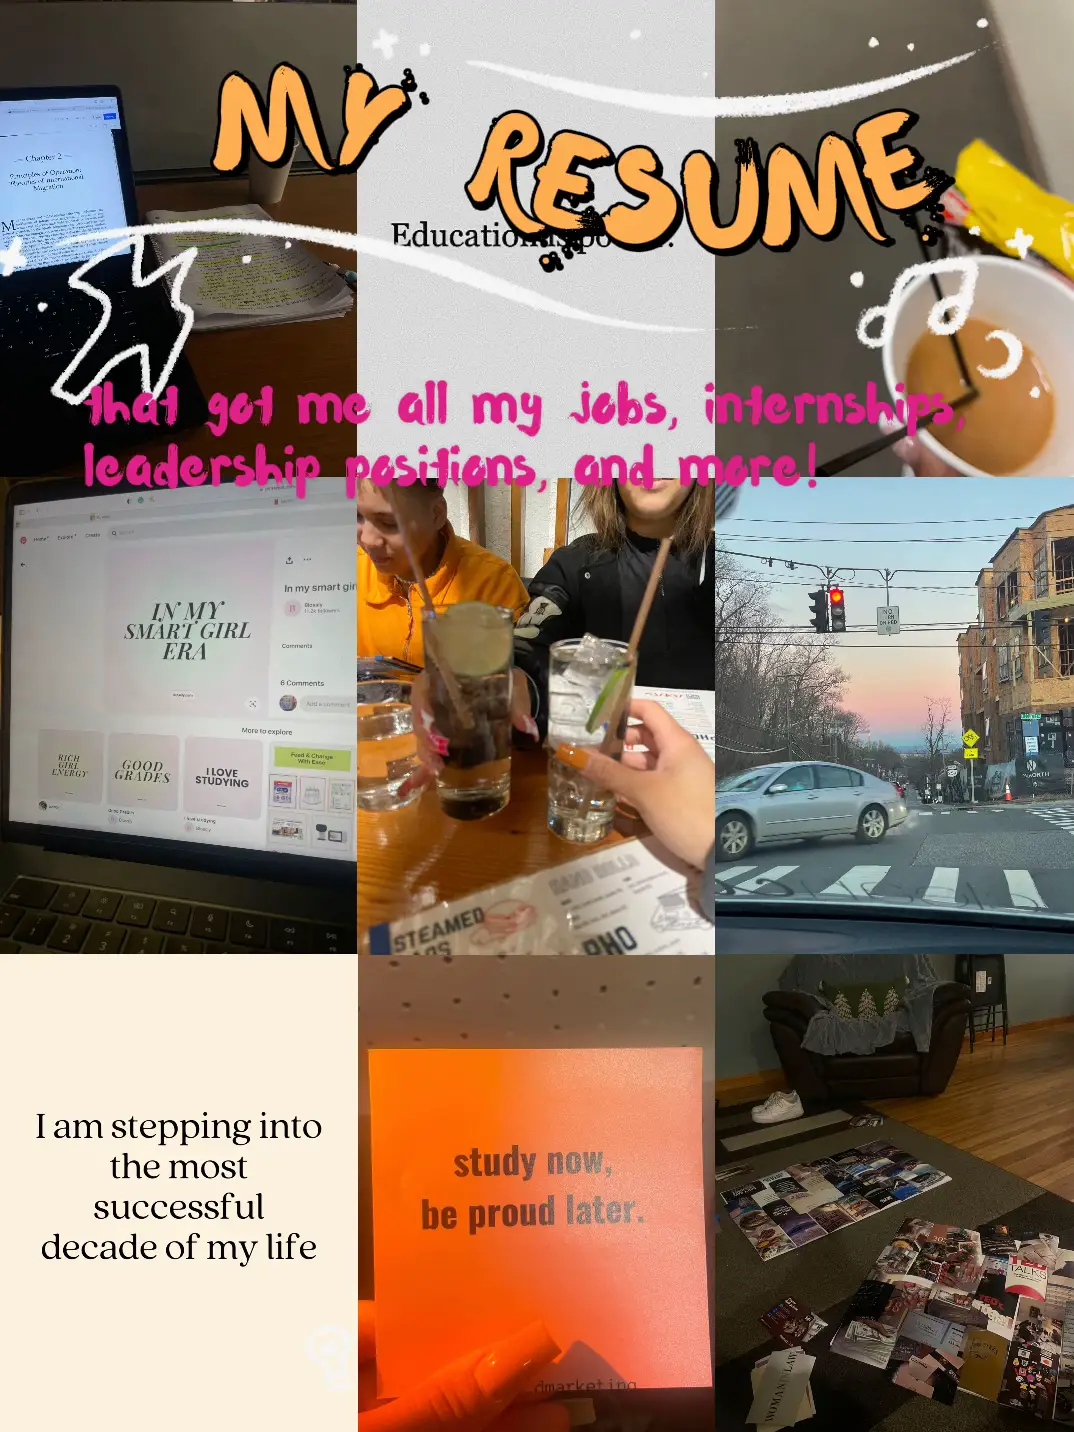  A collage of photos and text that says "My resume got me all my jobs, internships, leadership positions, and more! I am stepping into the most successful decade of my life."